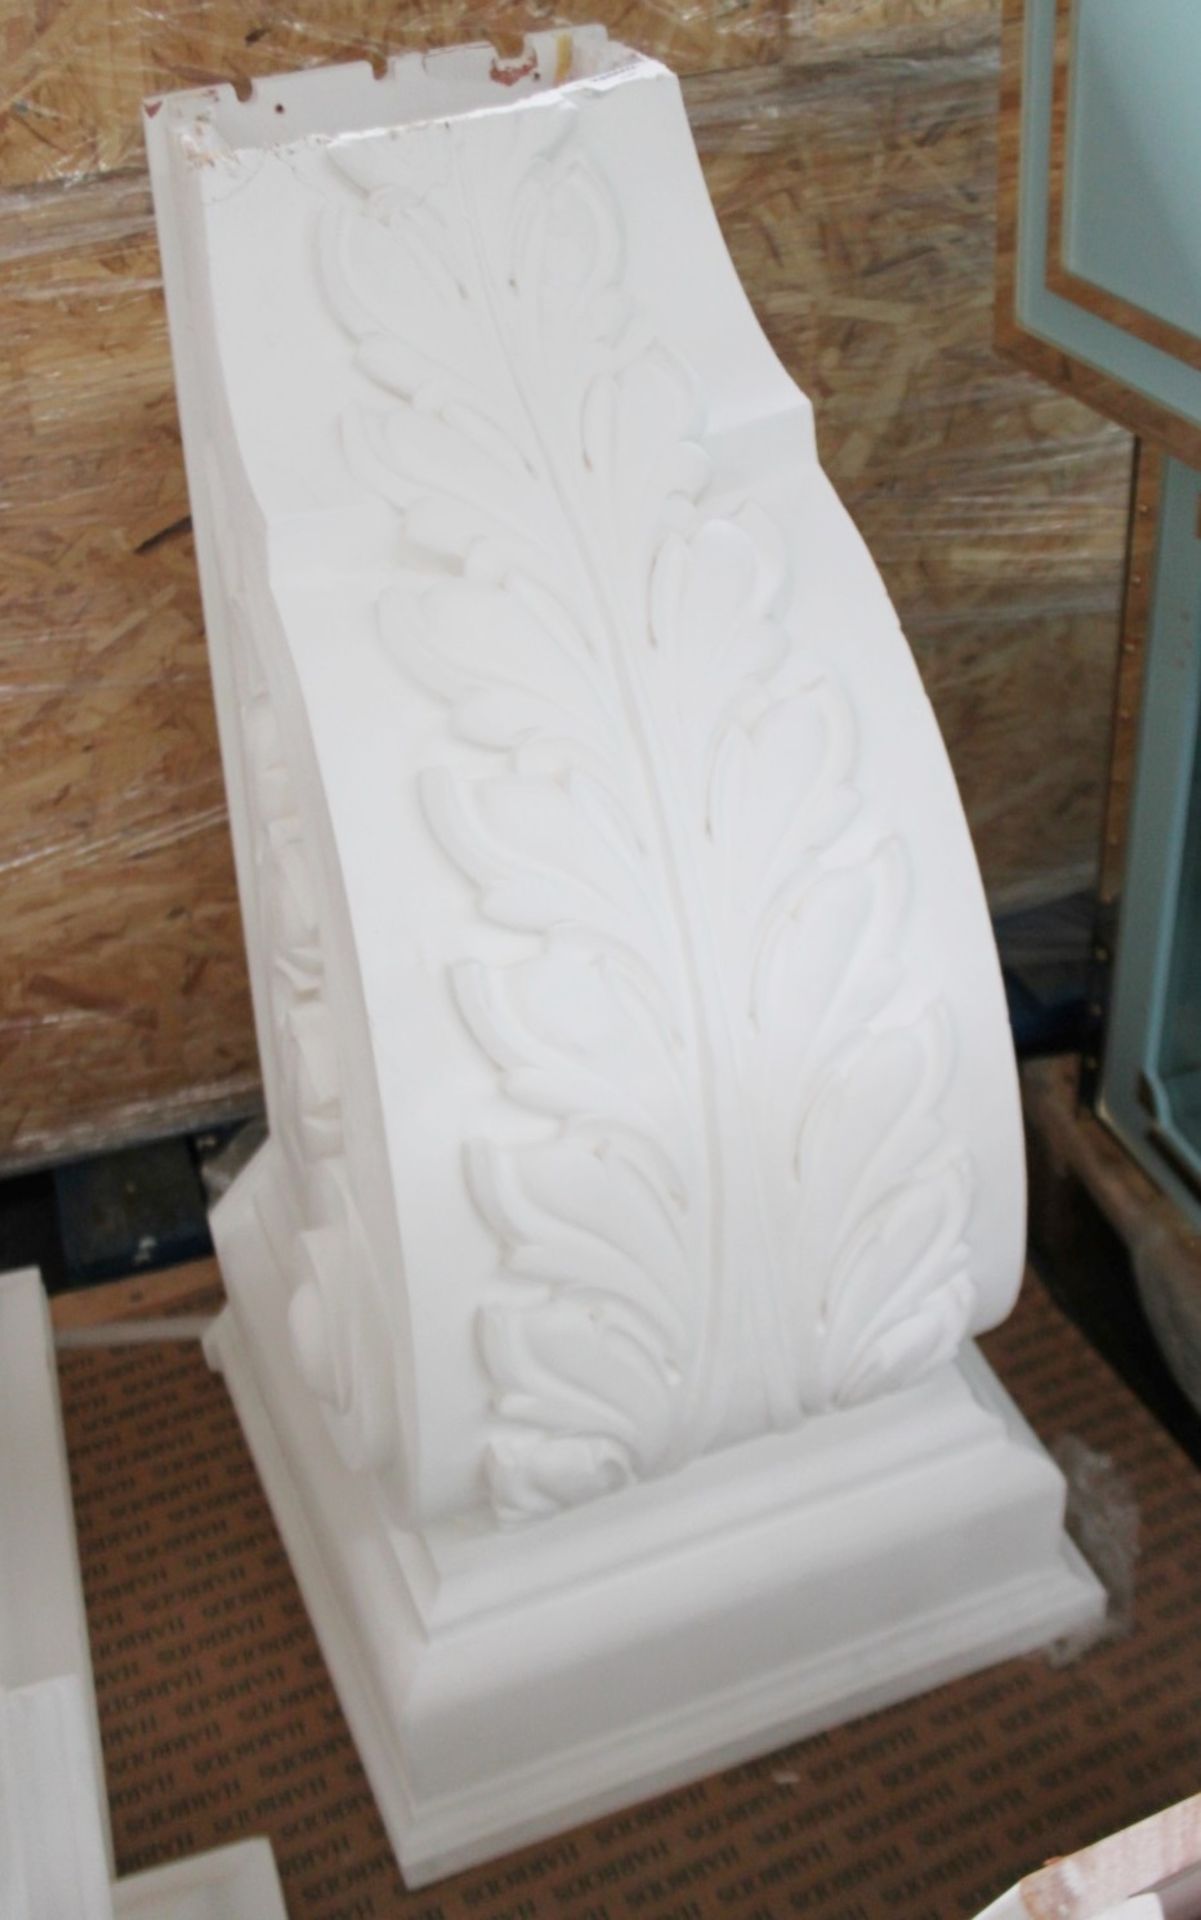 3 x Assorted Sections Of Ornate Display Plinth, Specially Commissioned For A Givenchy Window Display - Image 4 of 11